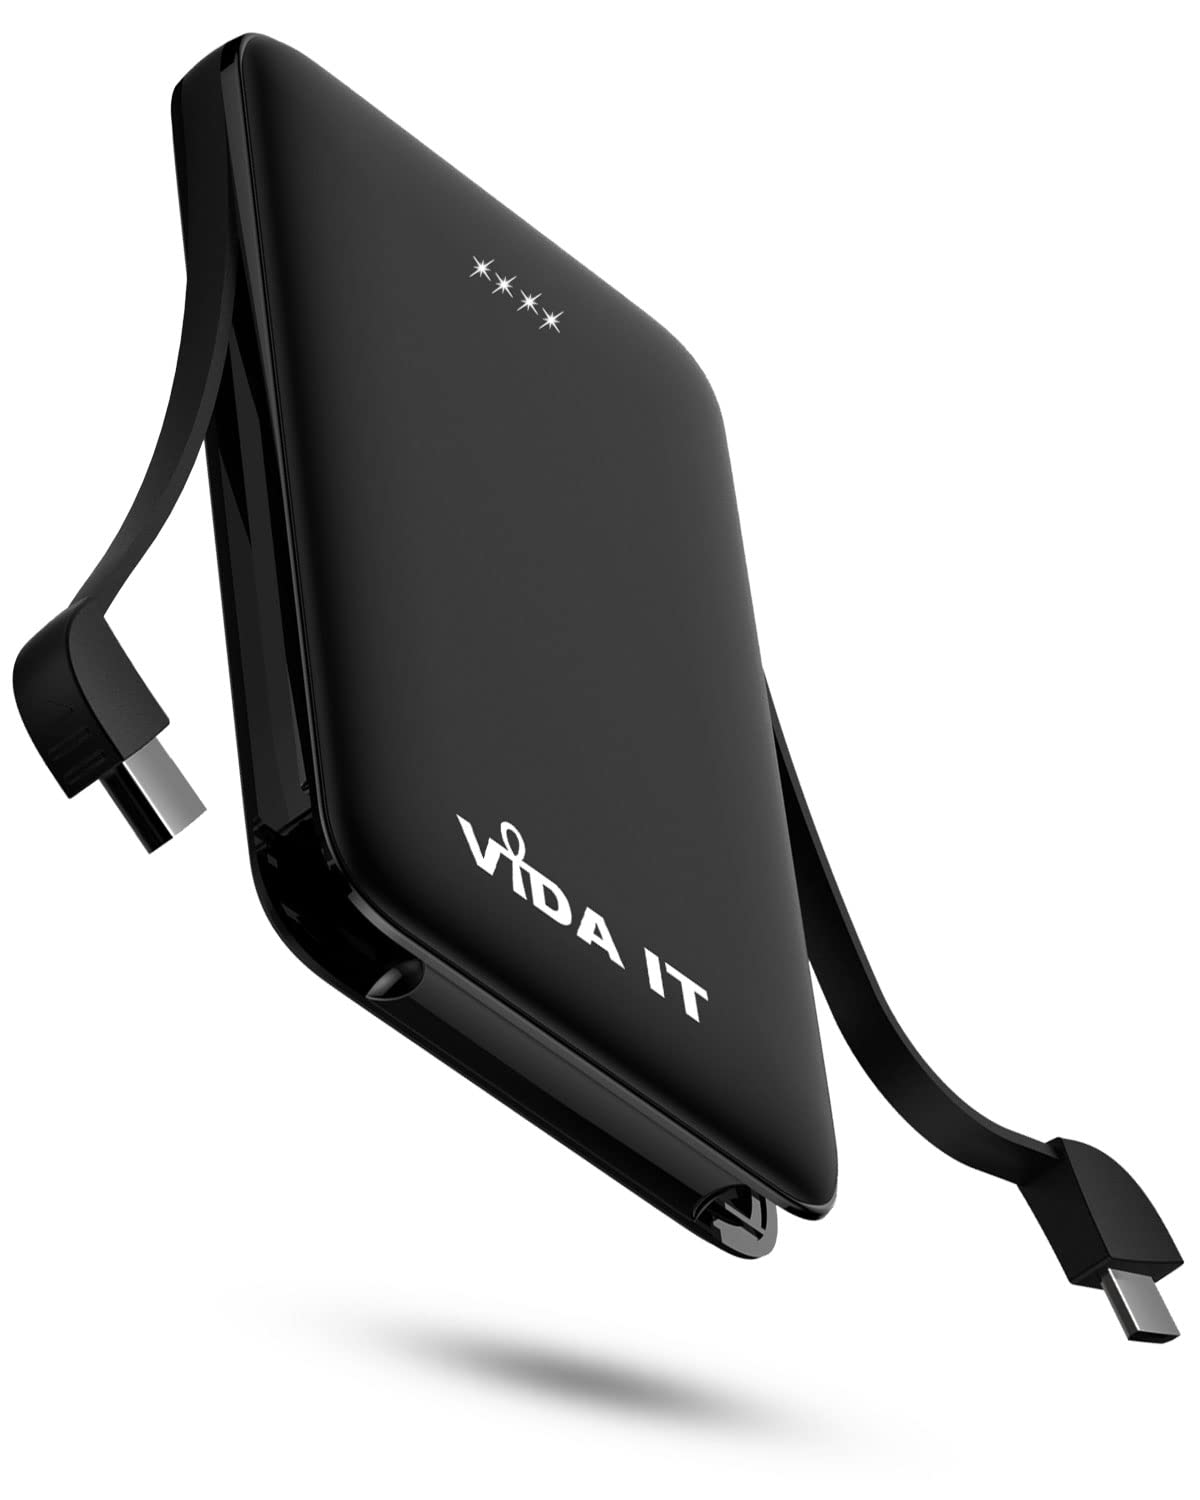 Vida IT vBot Power Bank Portable Charger Battery Pack for Samsung Galaxy S21 S20 S10 S8 A51 Android Mobile Phone Power Pack with Built-In Cable